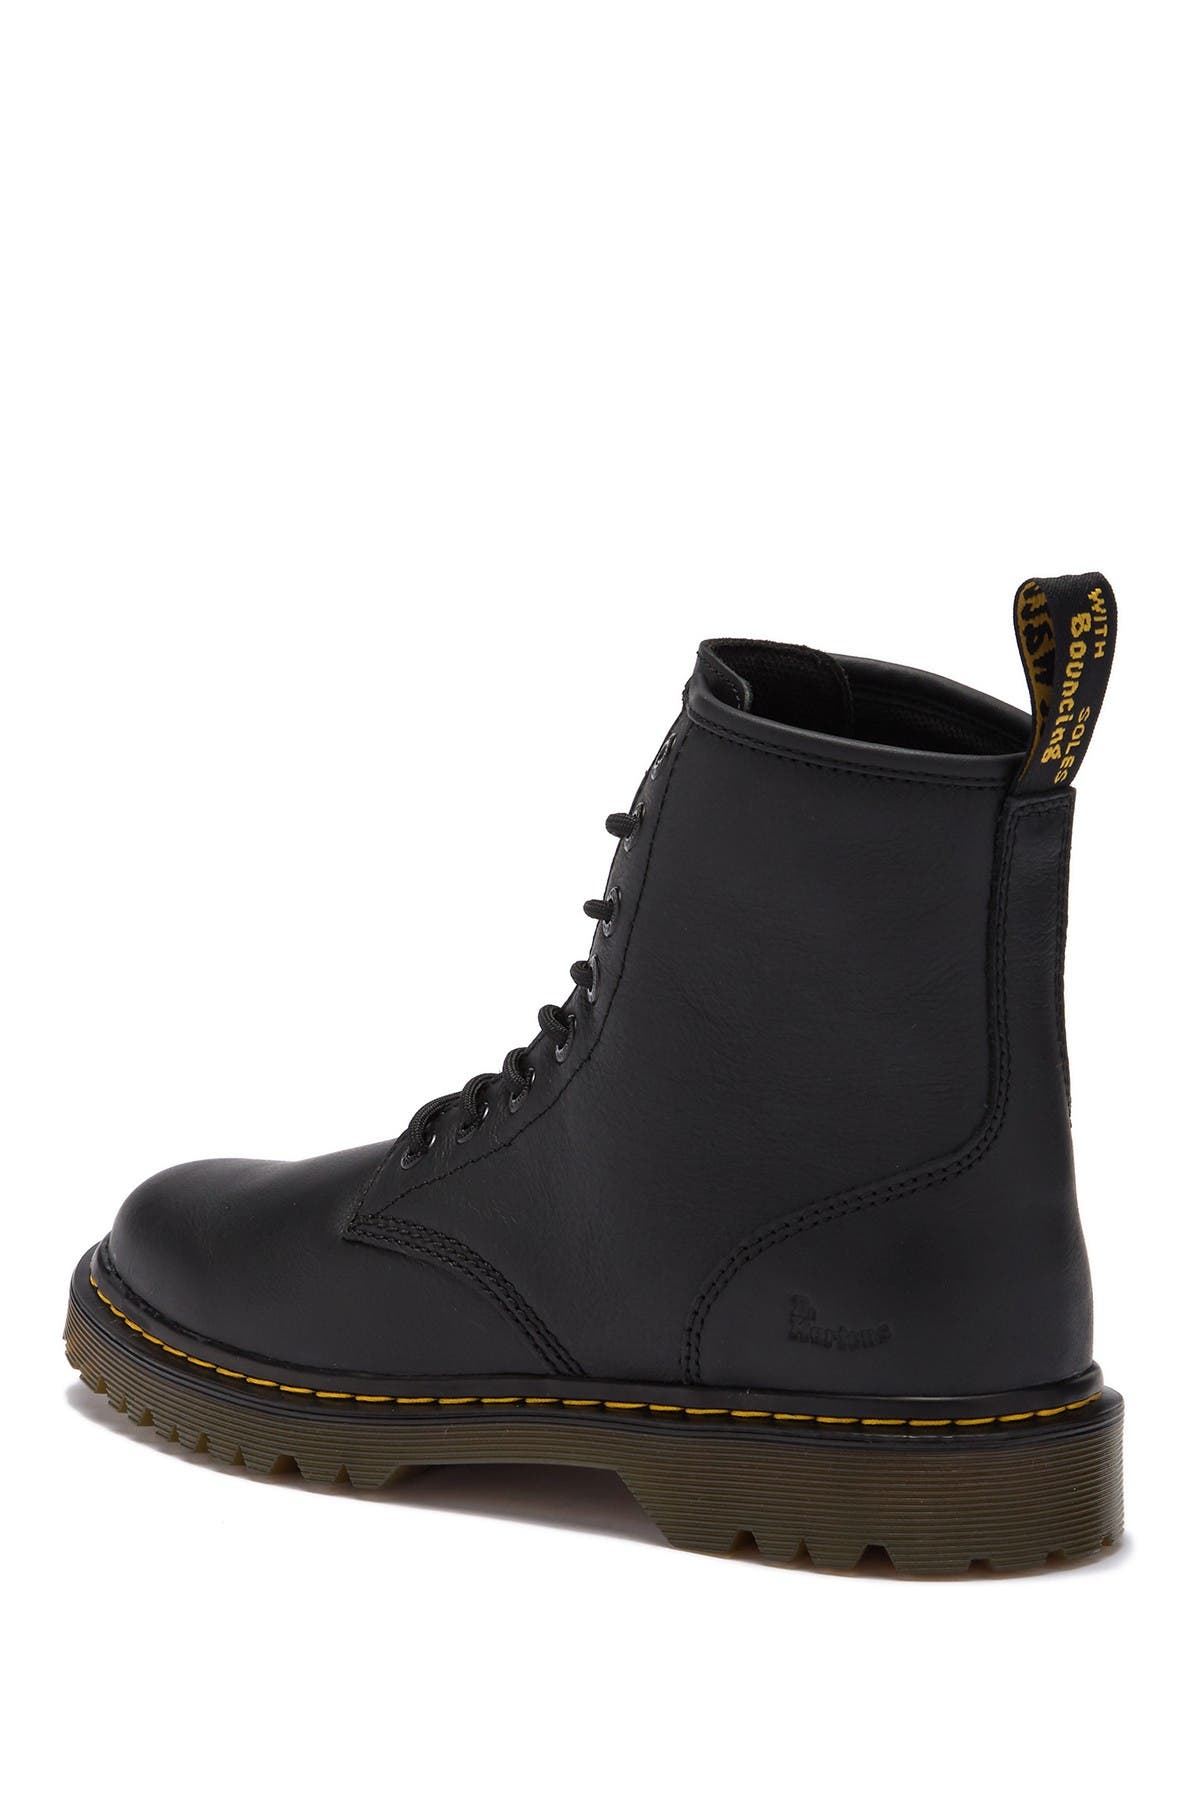 Dr. Martens | Awley Leather Boot 